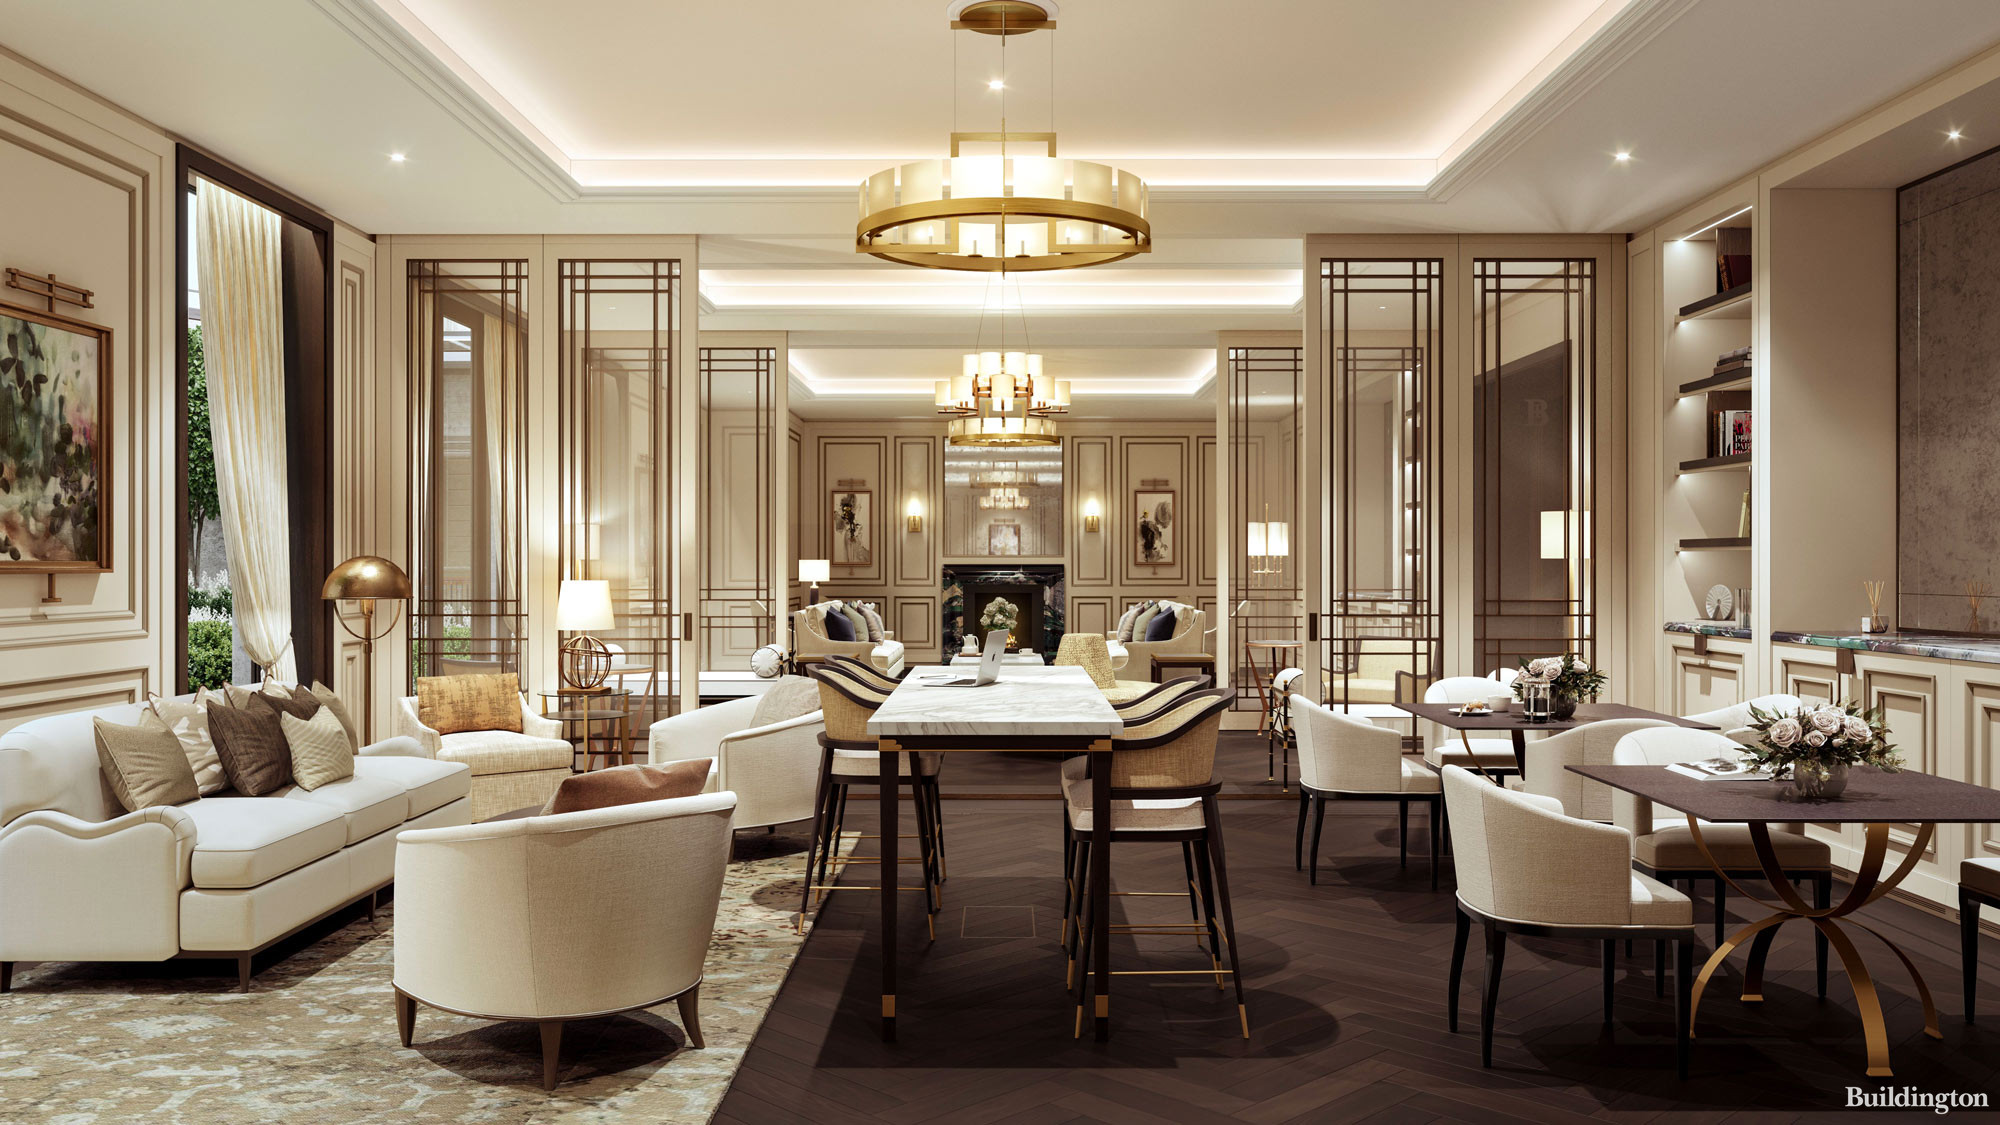 Resicents' Lounge at The OWO Residences by Raffles in Whitehall, London SW1.